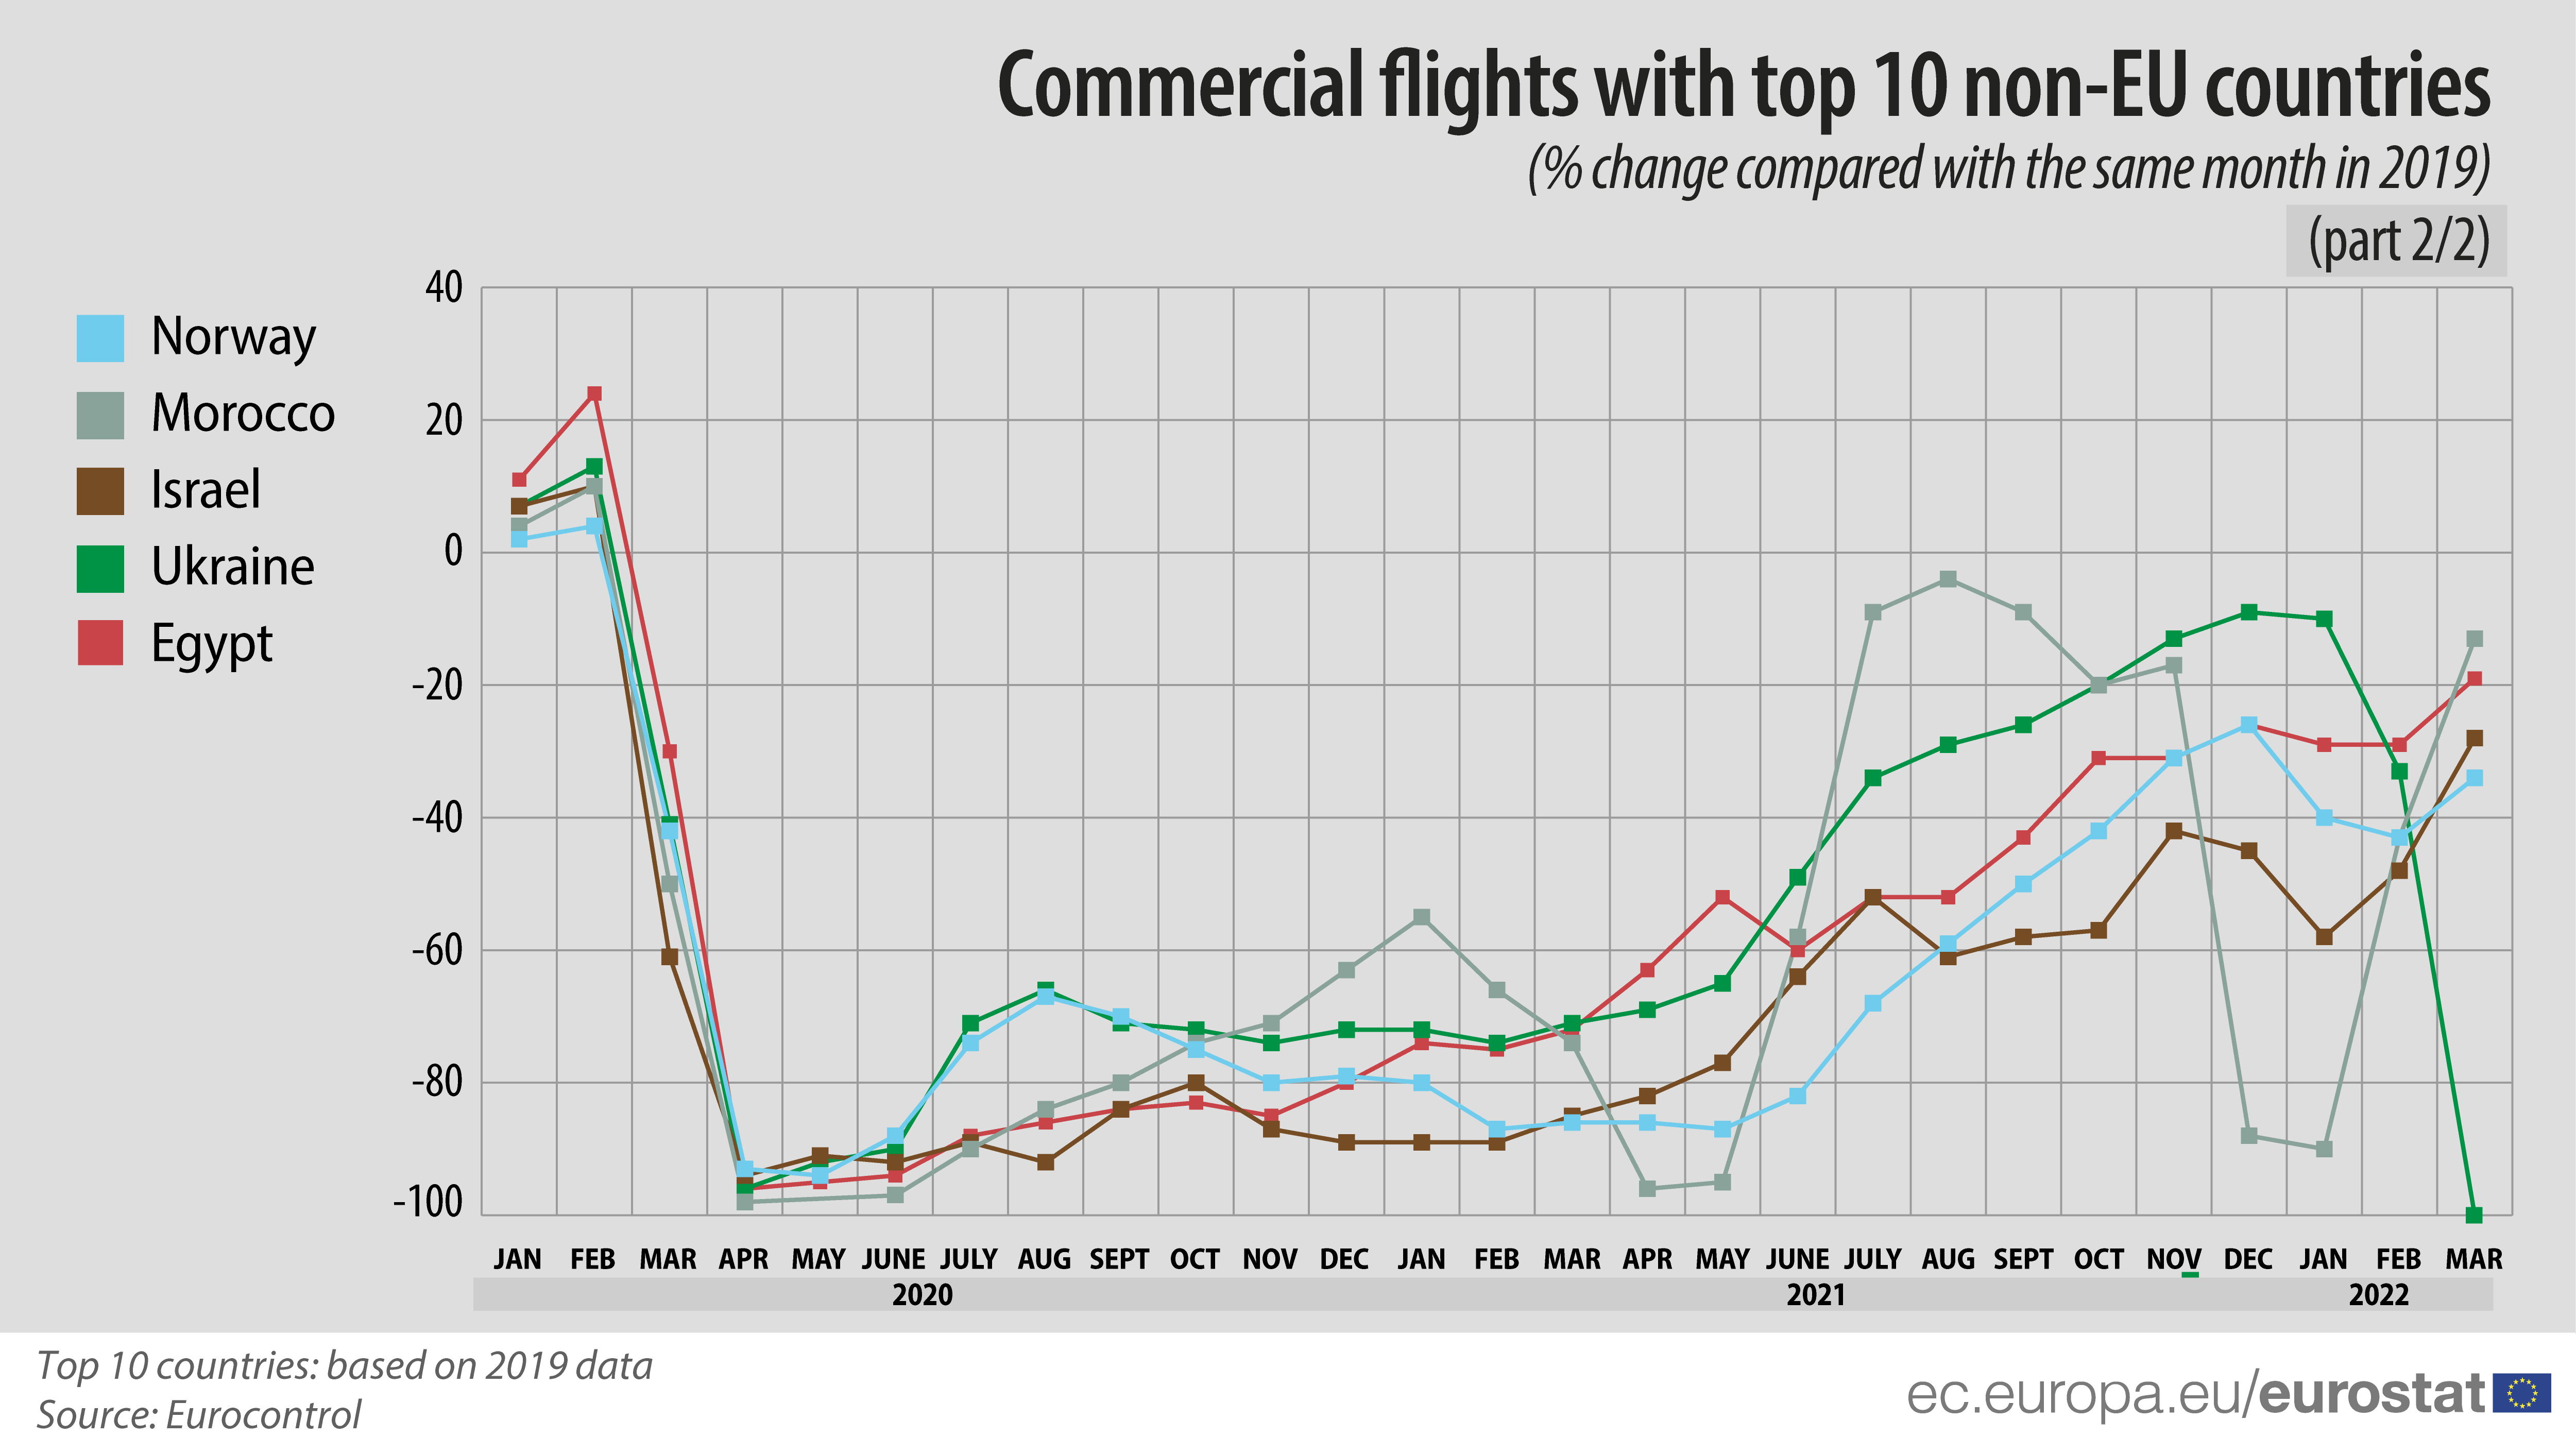 Timeline: Commercial flights with top 10 non-EU countries (% change compared with the same month in 2019; part 2/2)